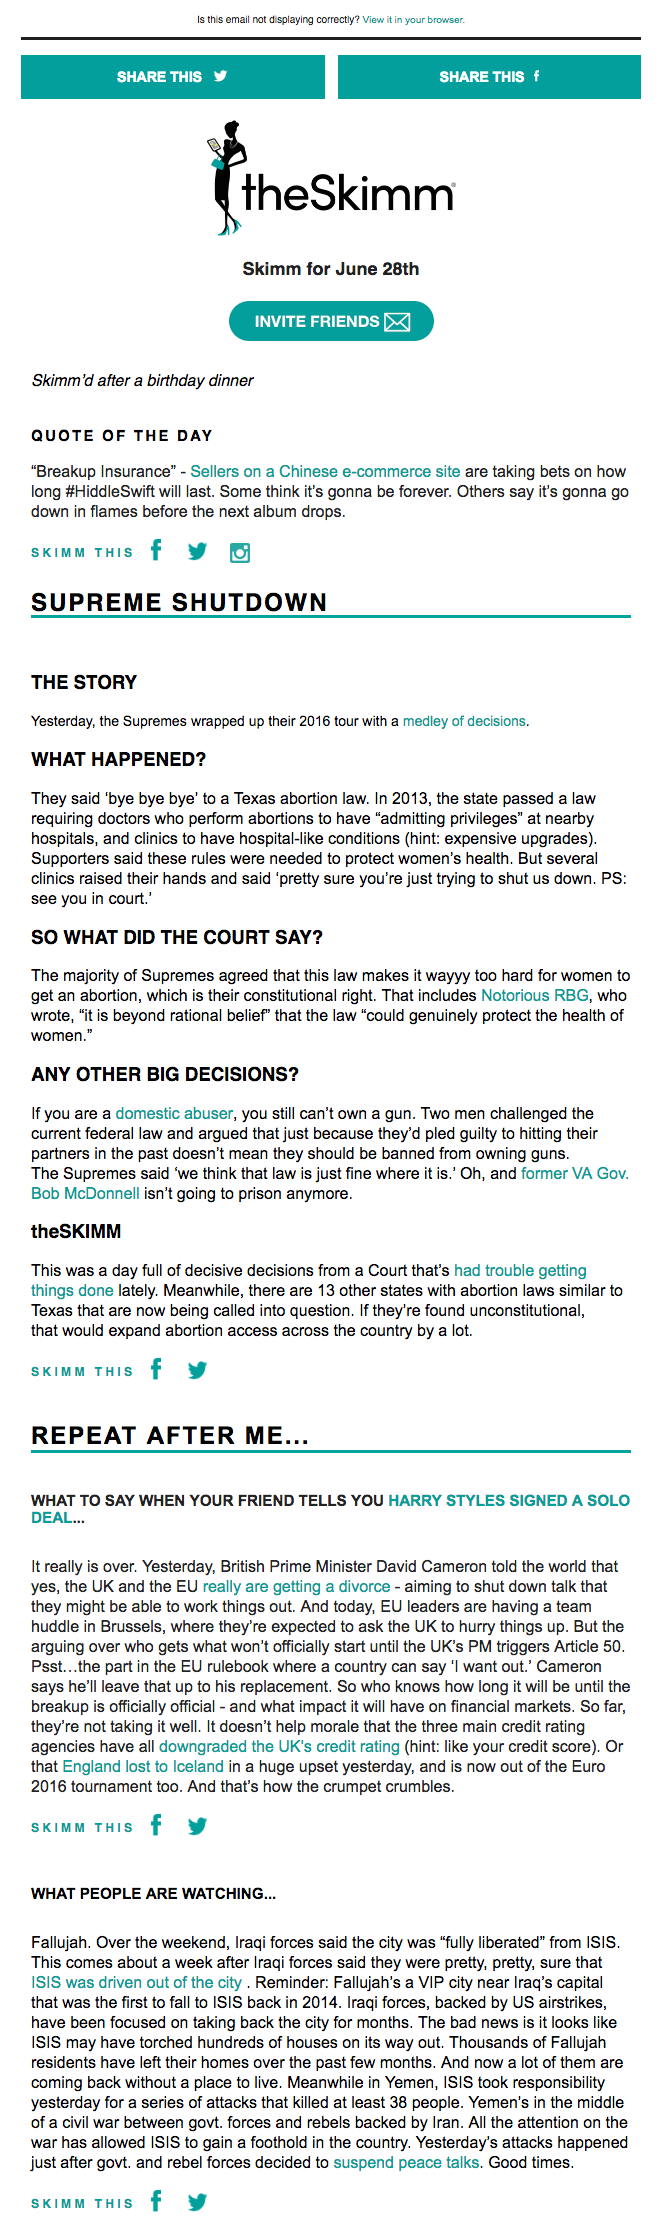 Email newsletter example design with news by theSkimm